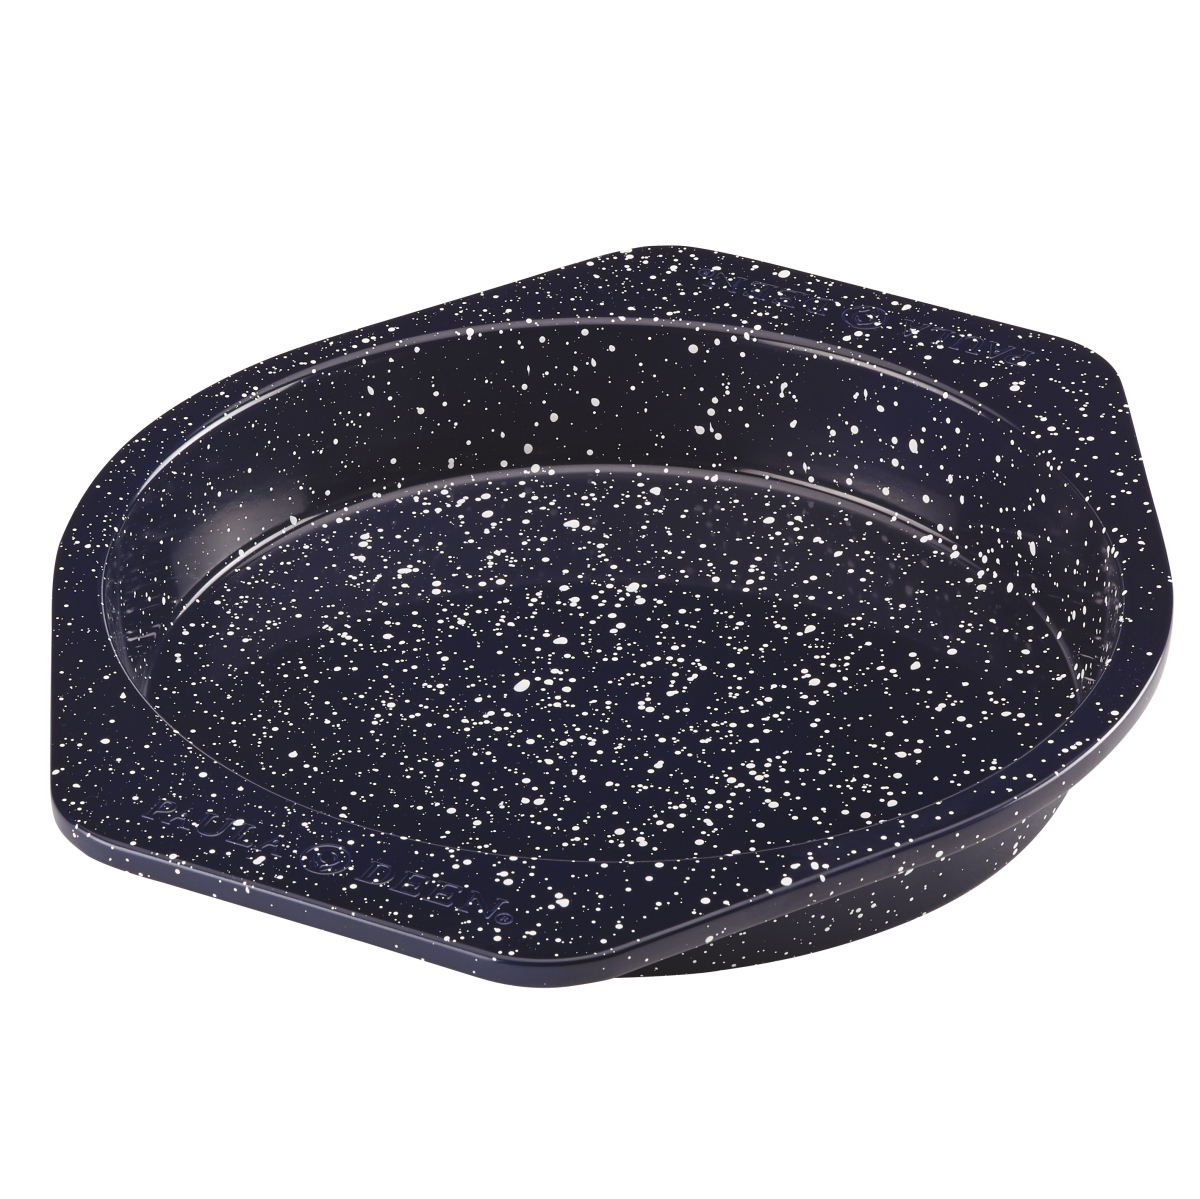 46815 Nonstick Speckled Bakeware Round Cake Pan, Deep Sea Blue Speckle - 9 In.